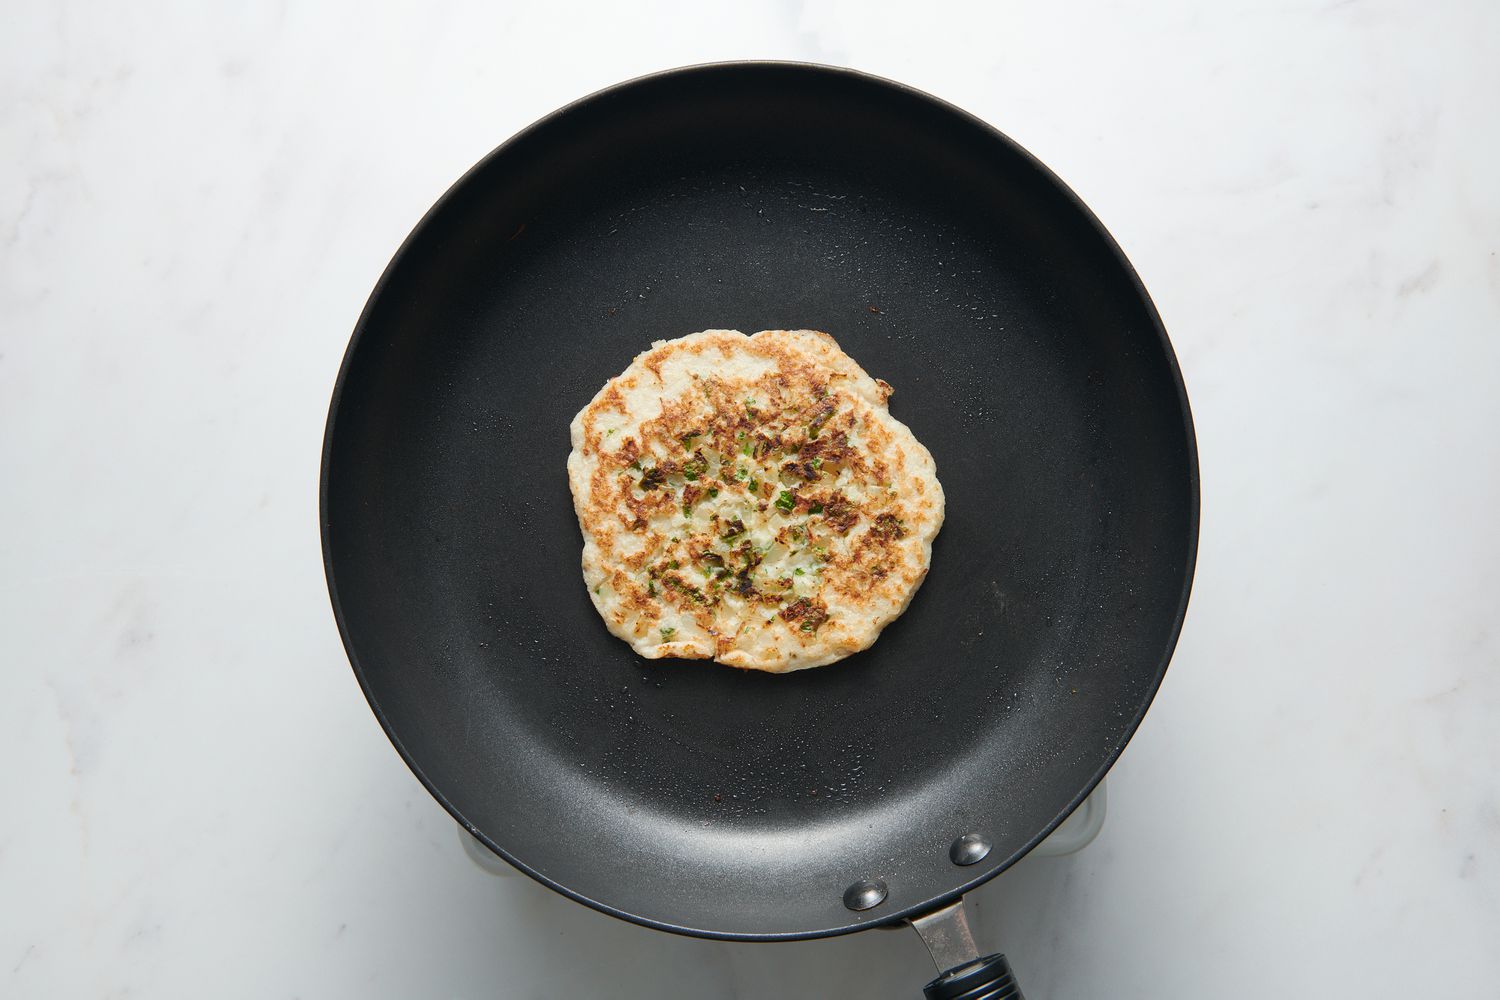 A greased nonstick pan with a cooked, browned uttapam